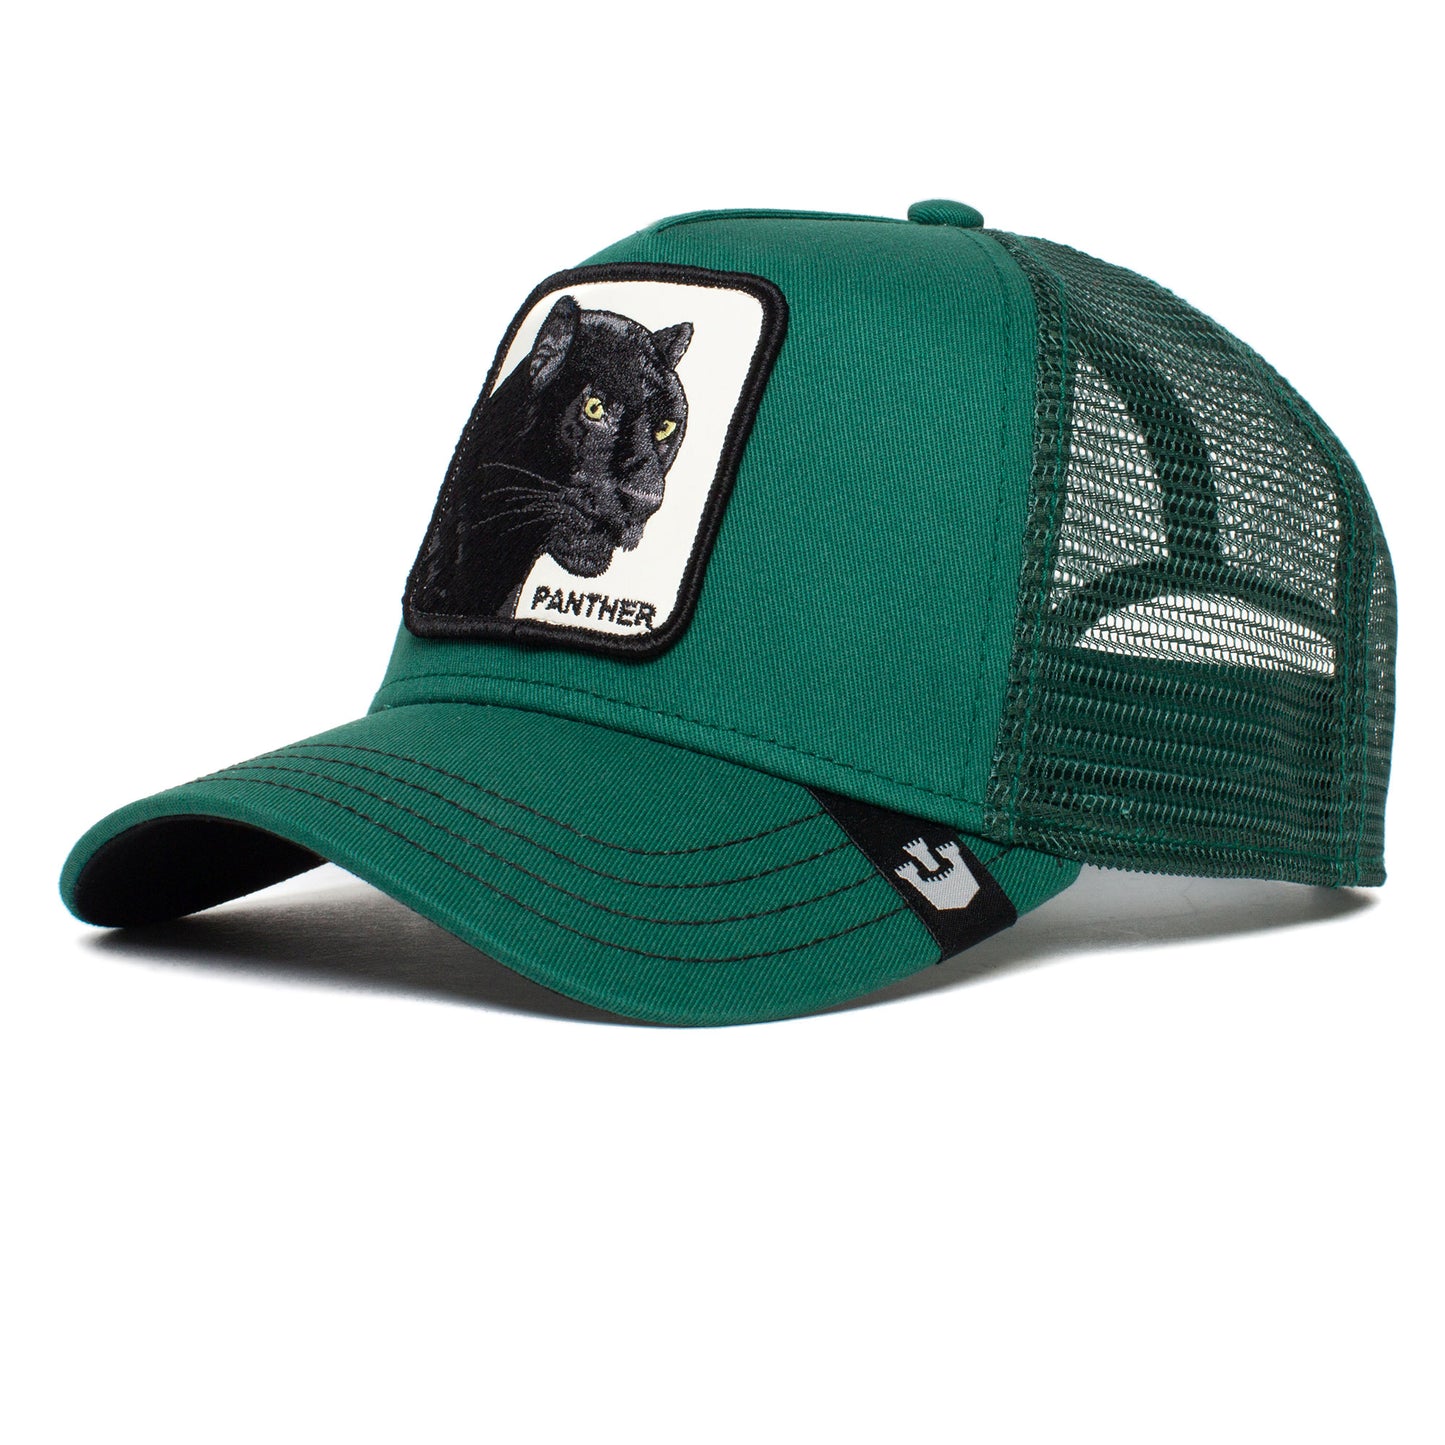 Goorin Bros The Panther in Green Color